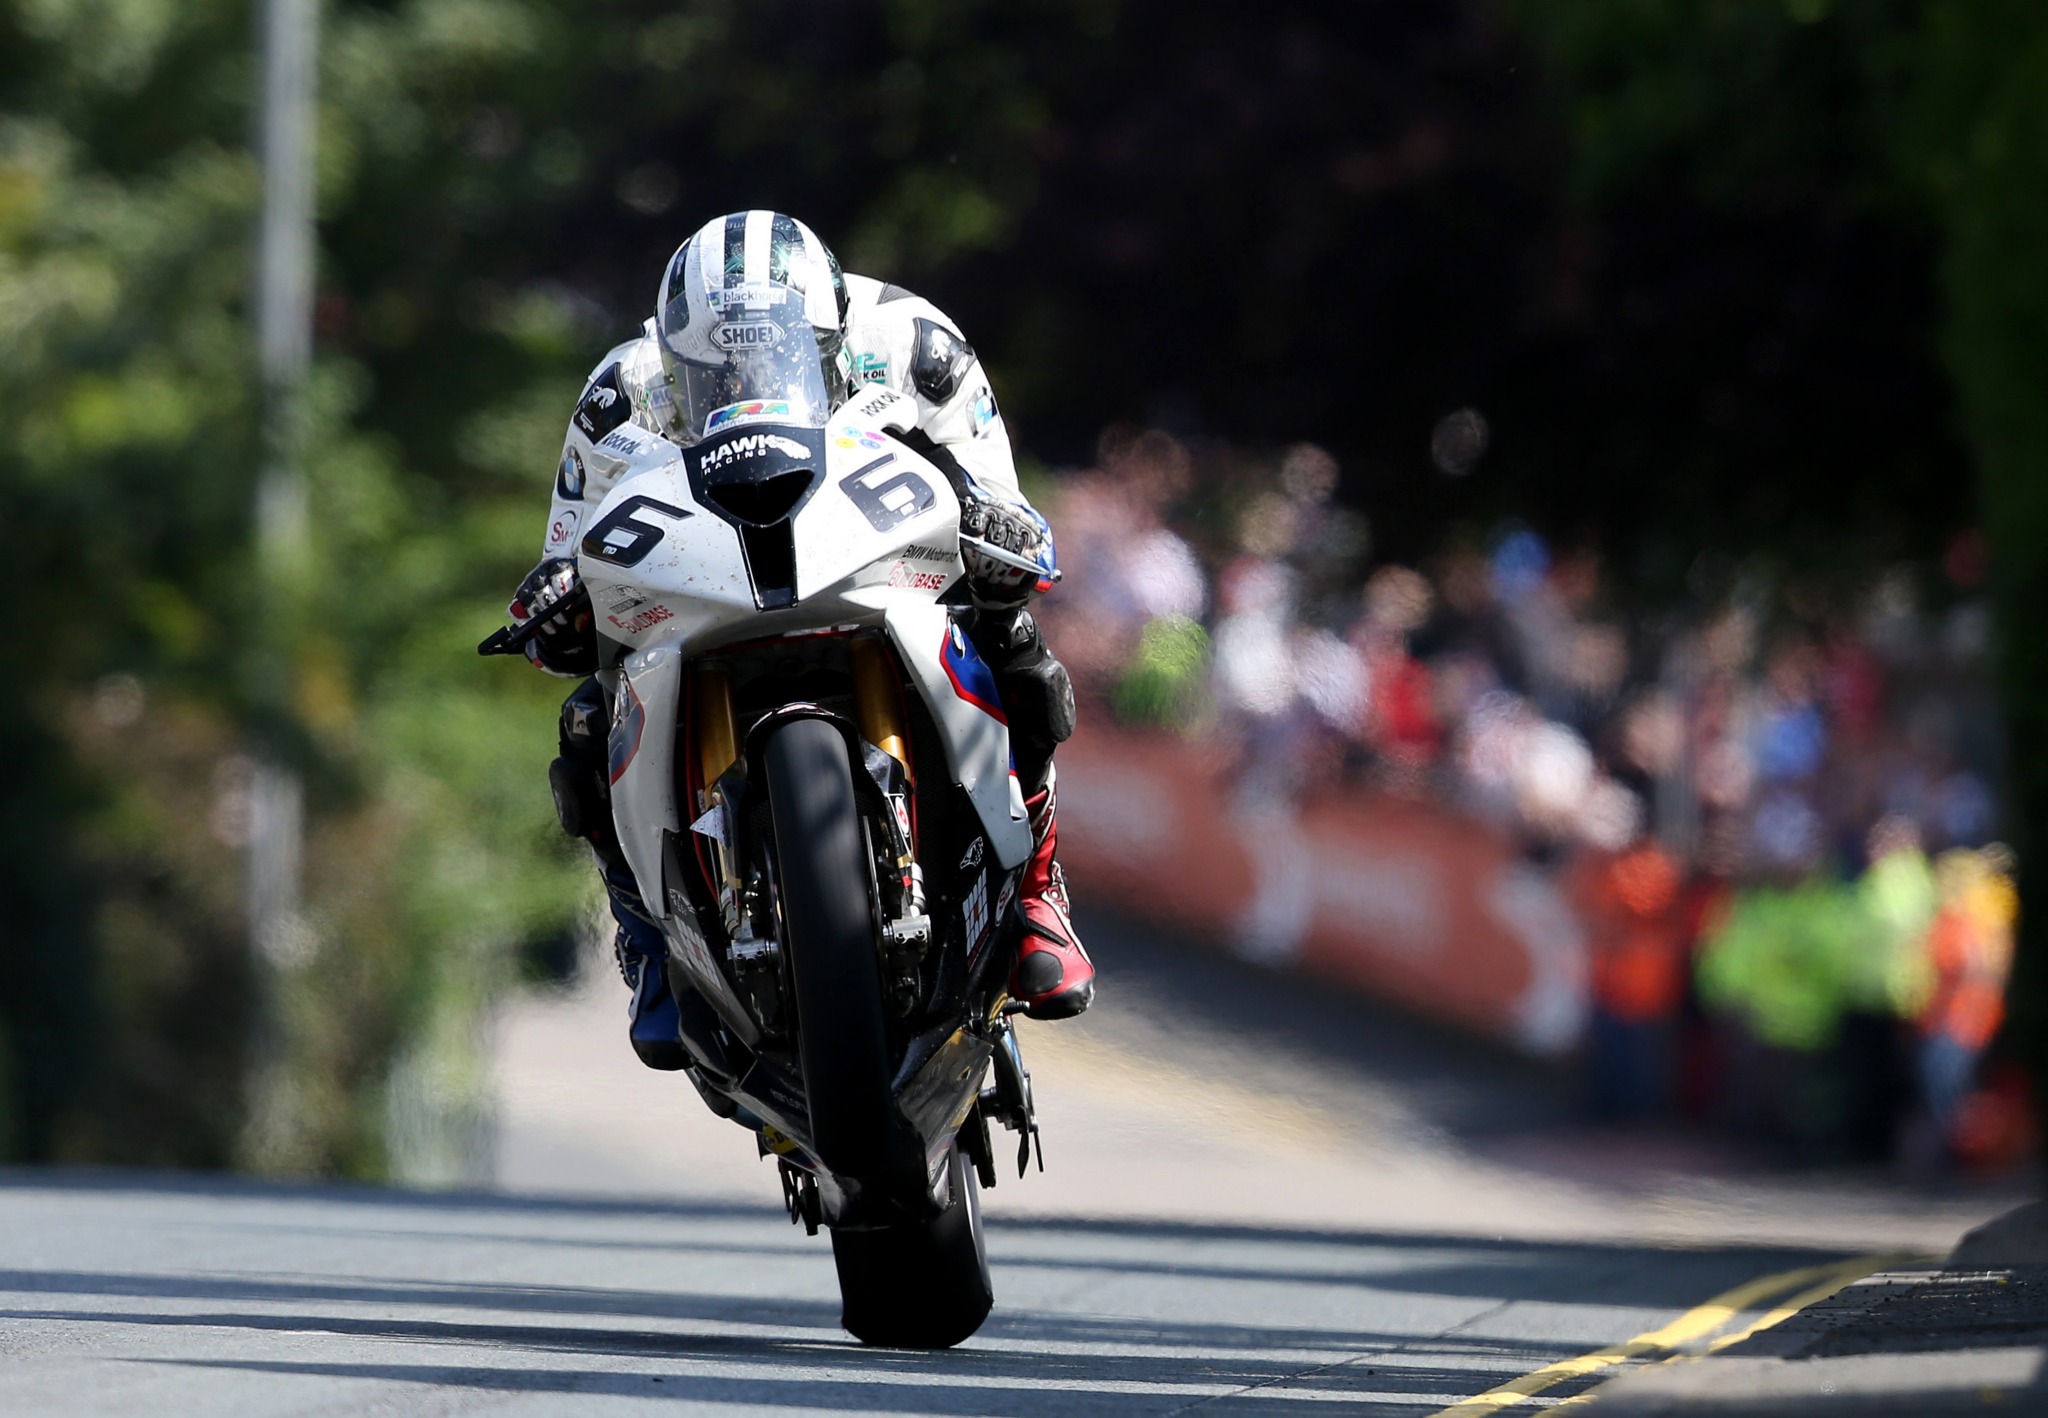 Michael Dunlop Brings BMW Historic Win in the Superbike Race at the